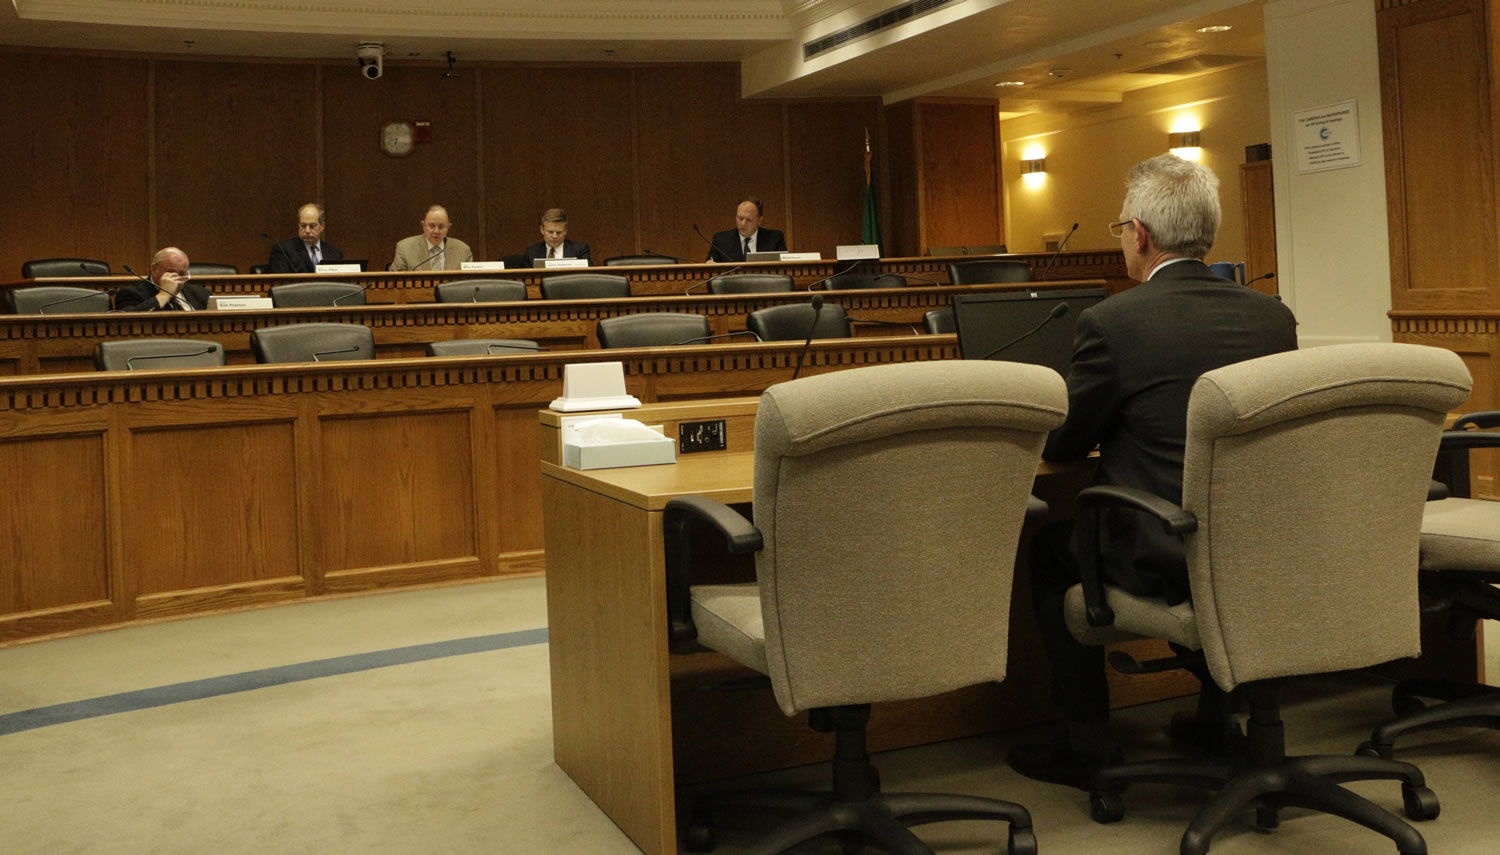 Attorney Mark Bartlett speaks before the Senate Law and Justice Committee on Wednesday in Olympia. Bartlett, who was hired by the committee to assist its inquiry into the erroneous early release of thousands of prisoners in Washington, told lawmakers his team has reviewed more than 54,000 documents so far.